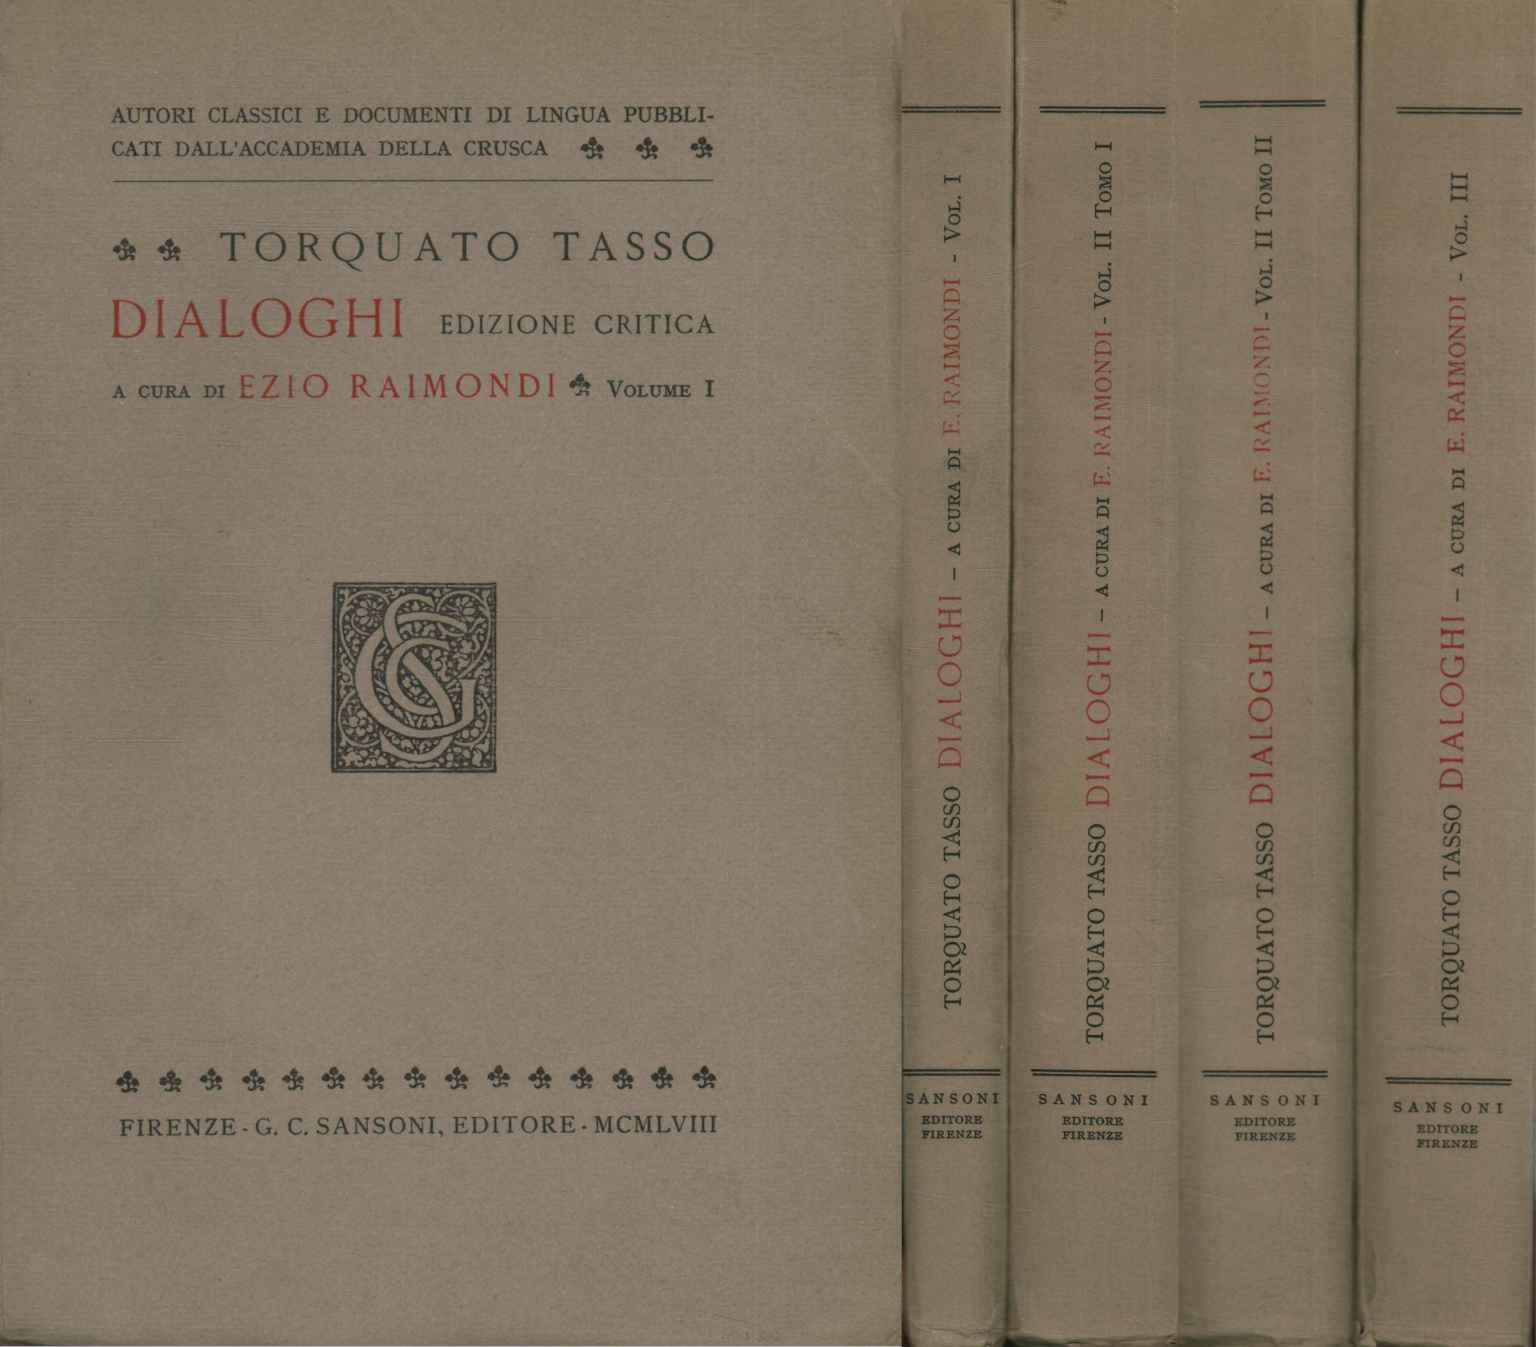 Dialogues (3 Volumes; 4 Tomes),Dialogues. Critical edition (3 Volumes. 4%,Dialogues. Critical edition (3 Volumes. 4%,Dialogues. Critical edition (3 Volumes. 4%